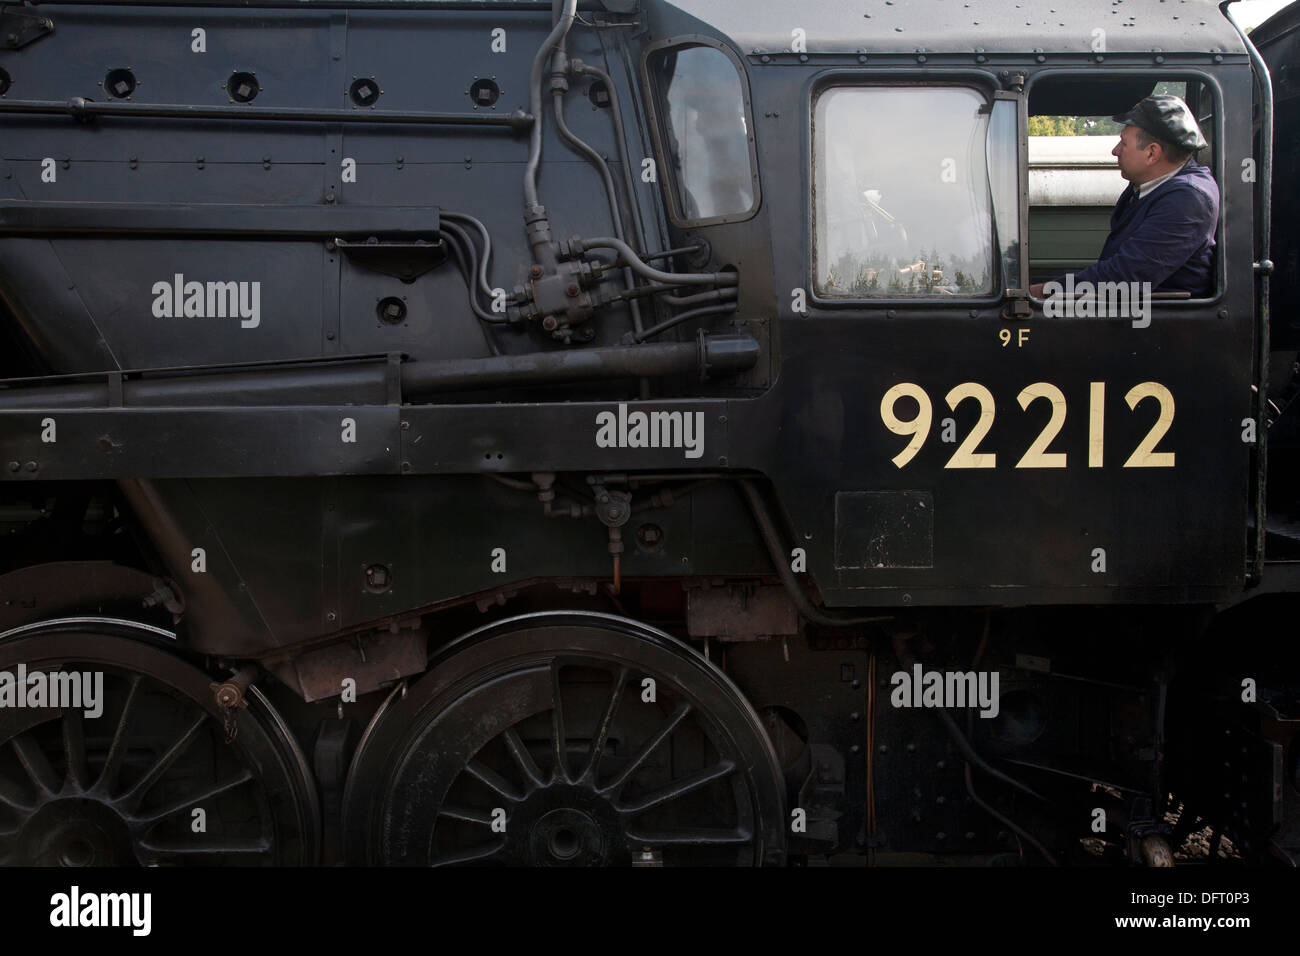 Steam locomotive 92212 with train driver in window on the Bluebell Railway Stock Photo